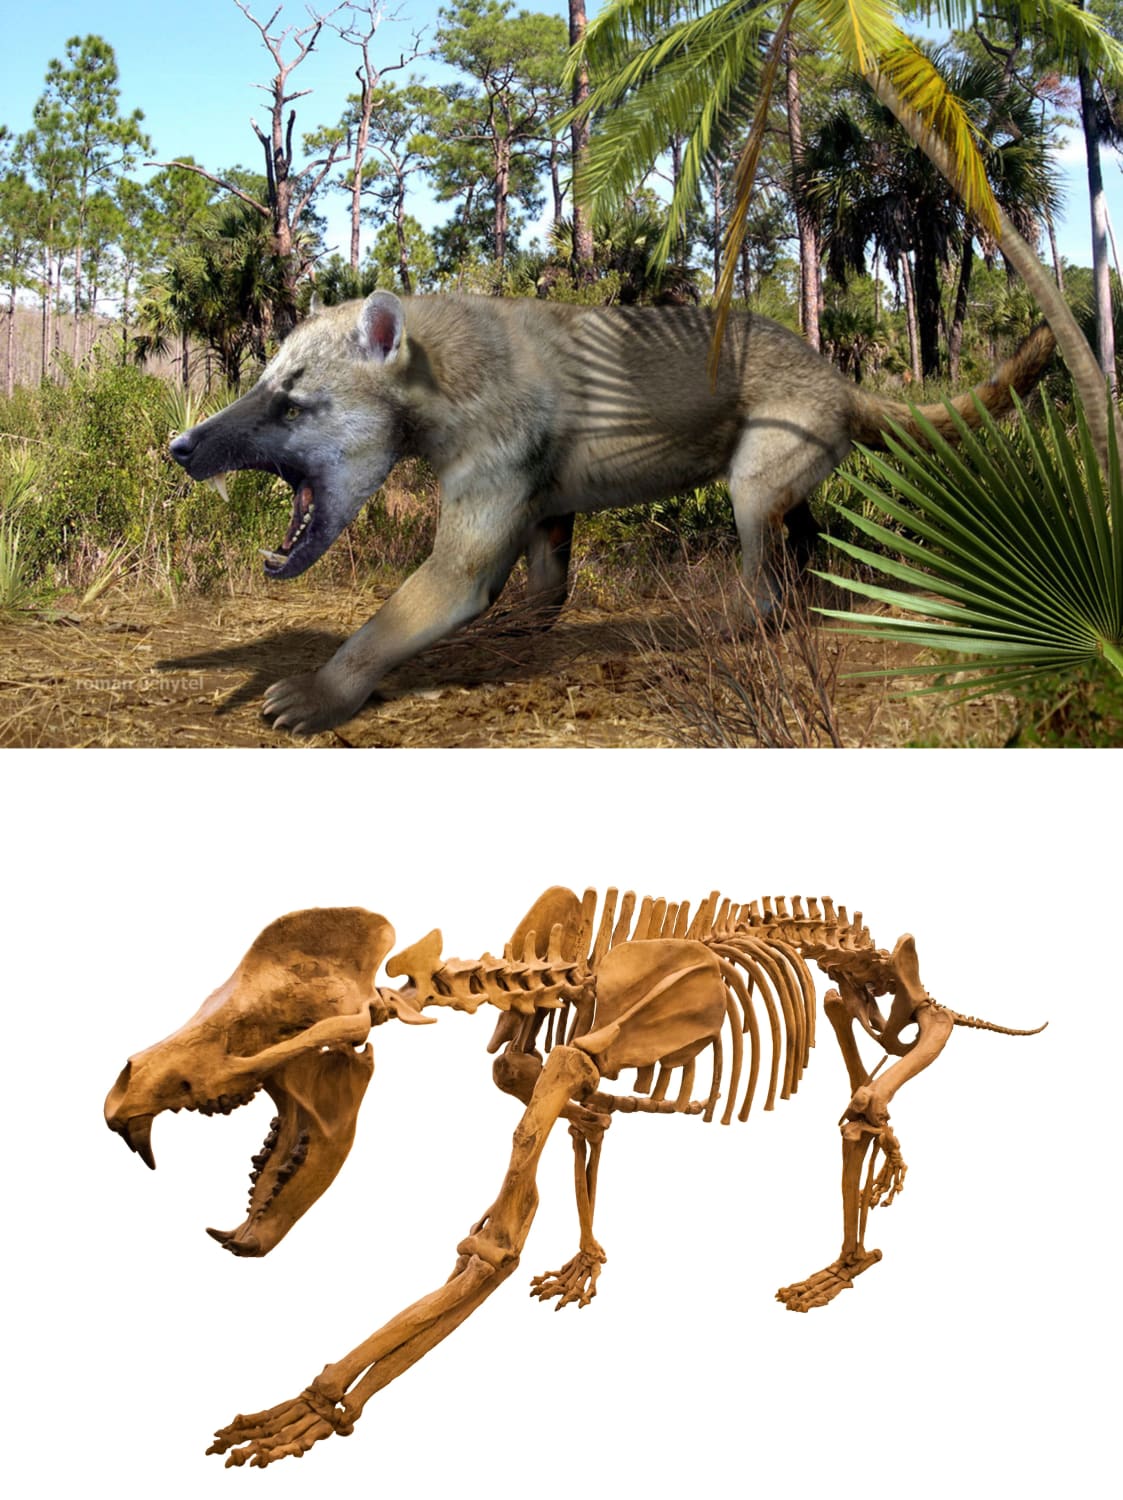 Amphicyon ingens was the largest species of bear-dog. It weighed around half a ton.